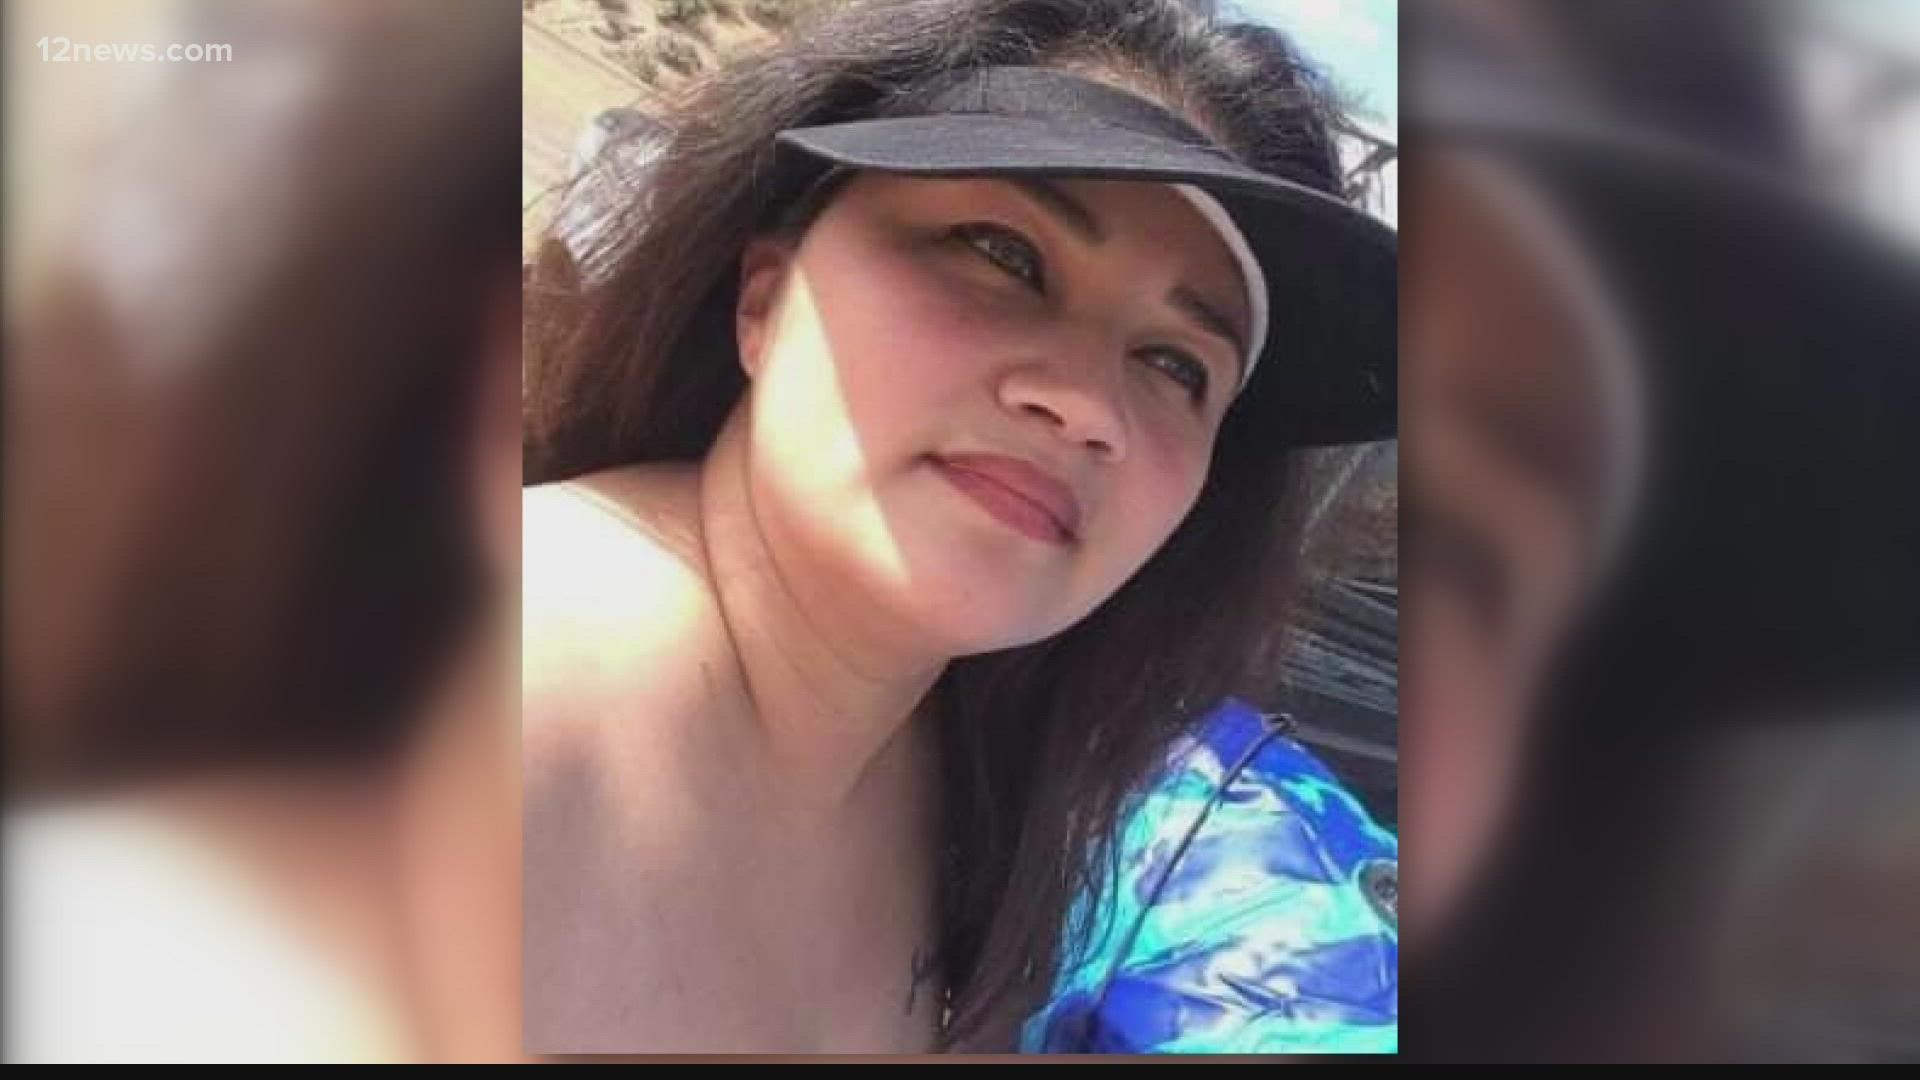 Jeannie Montoya was run over by a box truck near 59th Ave. and Palm Lane on Oct. 23. Her family is pleading for help after police identified Delano Pore as a suspect